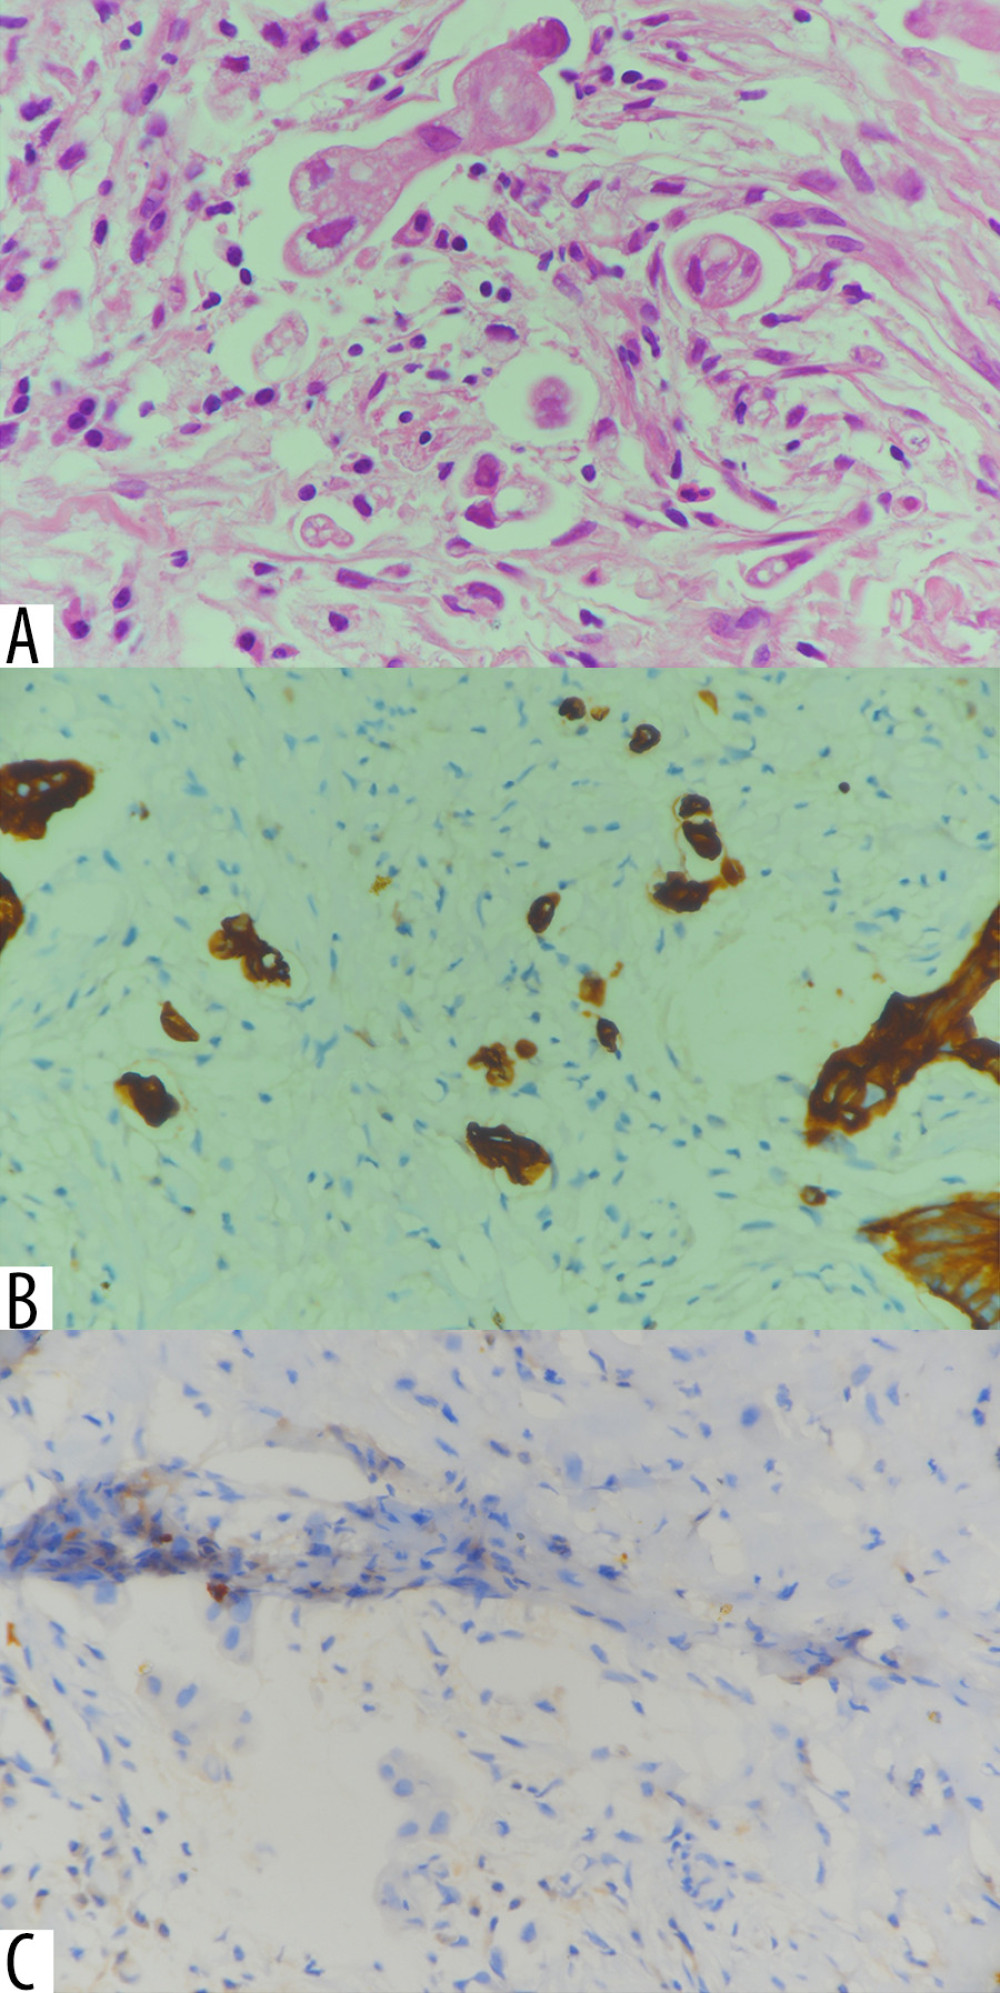 Histopathological and immunohistochemical findings of the port-site abdominal wall mass. (A) Moderately differentiated adenocarcinoma on the hematoxylin and eosin stain (H and E ×60). (B) Positive cytokeratin 7 (CK7) (×40). (C) Negative cytokeratin 20 (CK20) (×40).